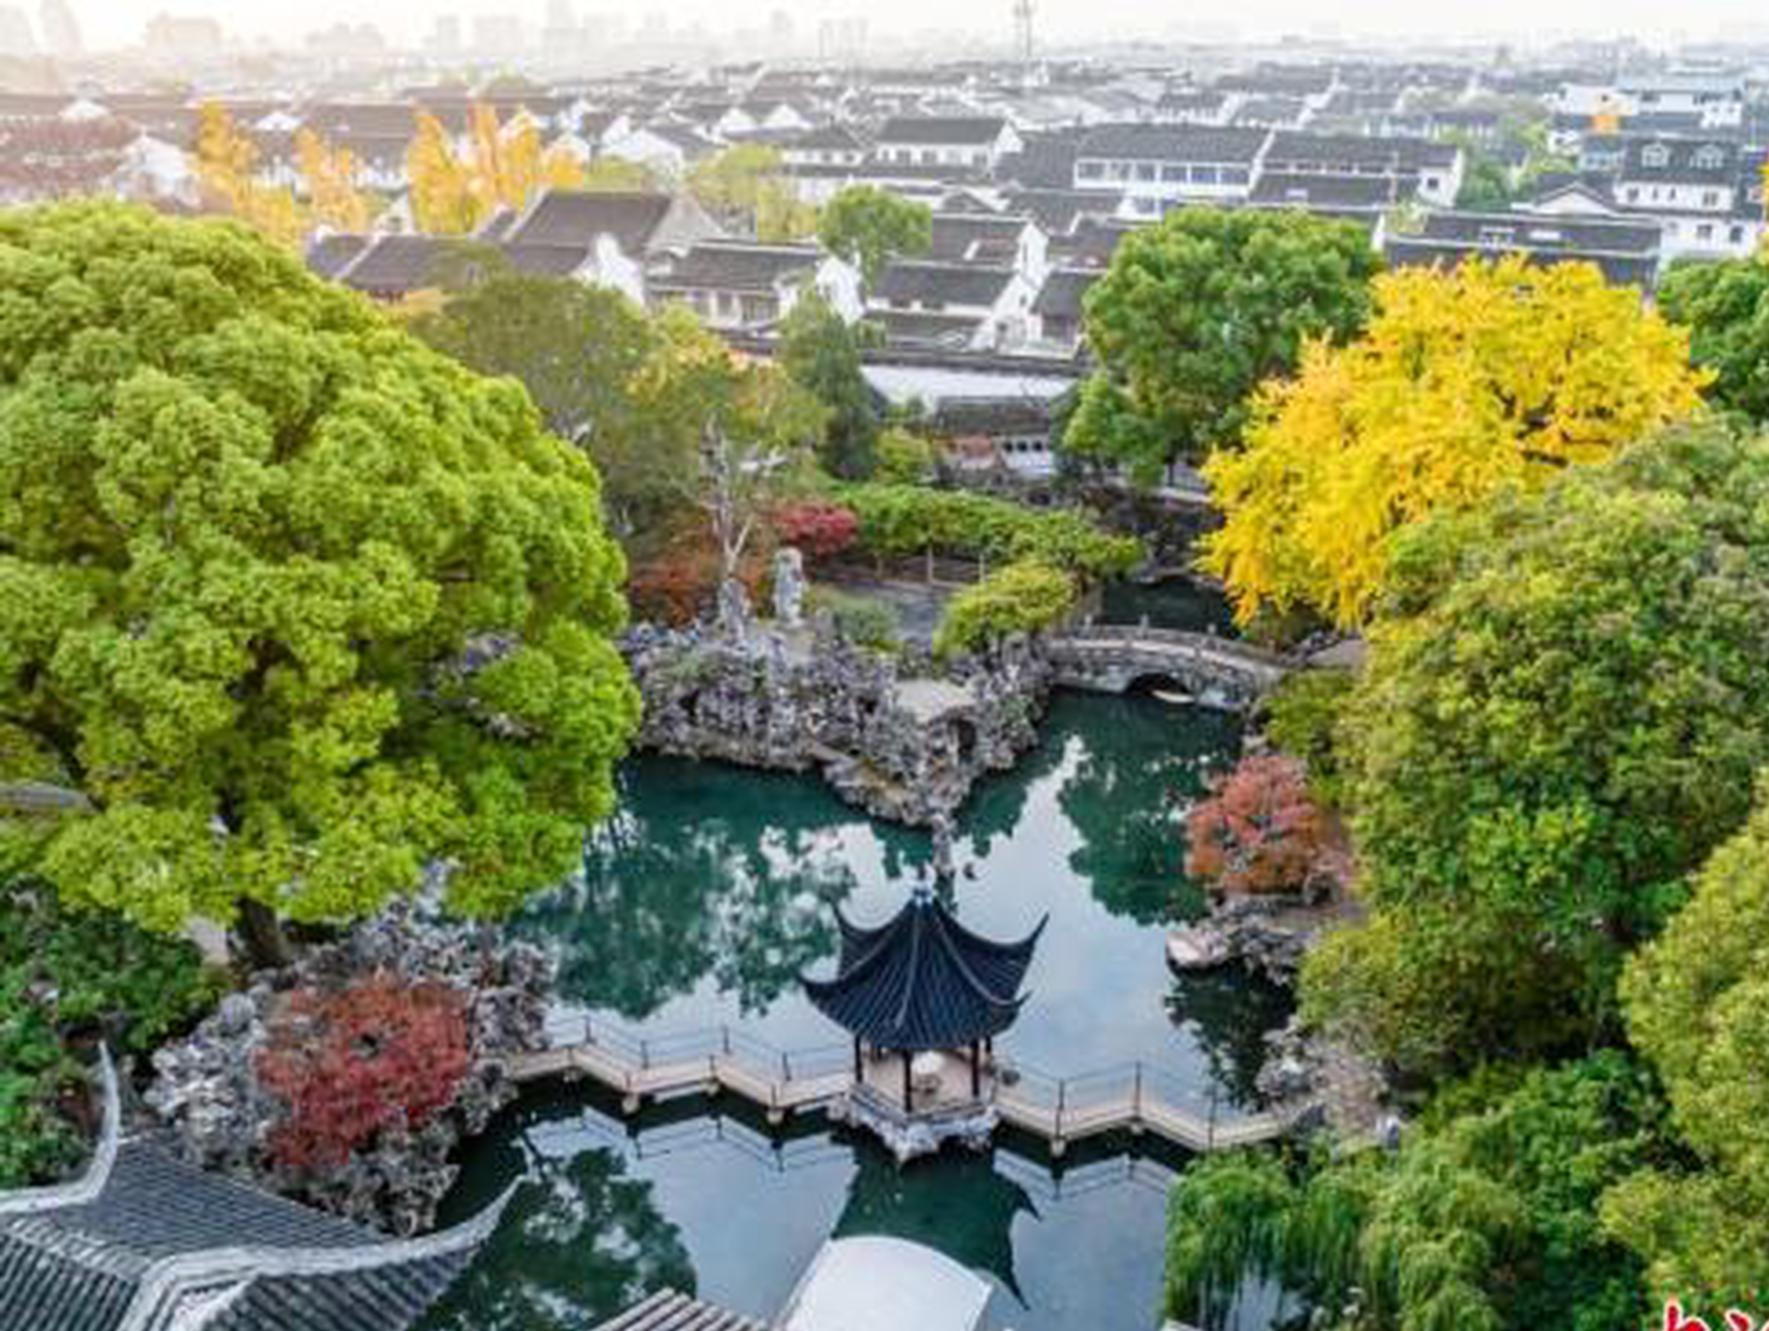 Suzhou joins China's super-large cities